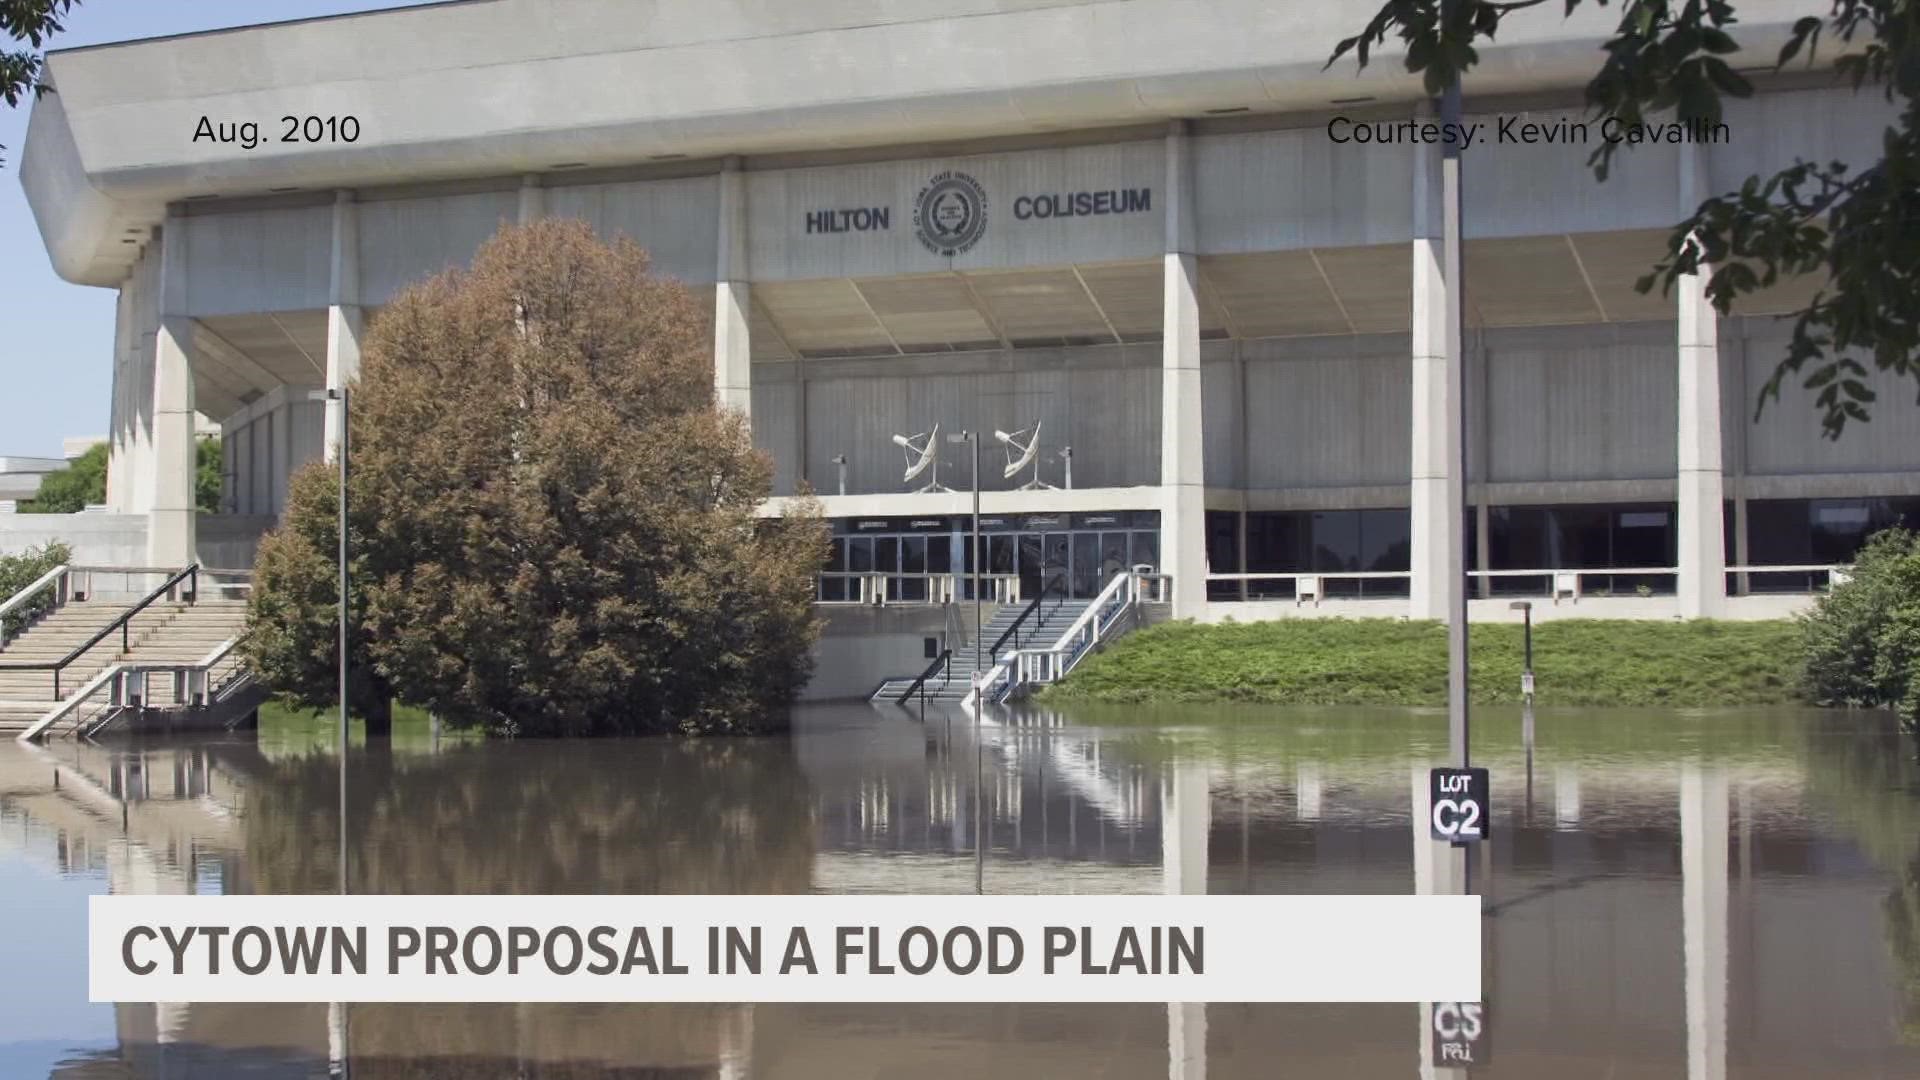 The site where the $200 million project will lay across three acres is a known spot for flooding in the past, with floods as recently as 2010.